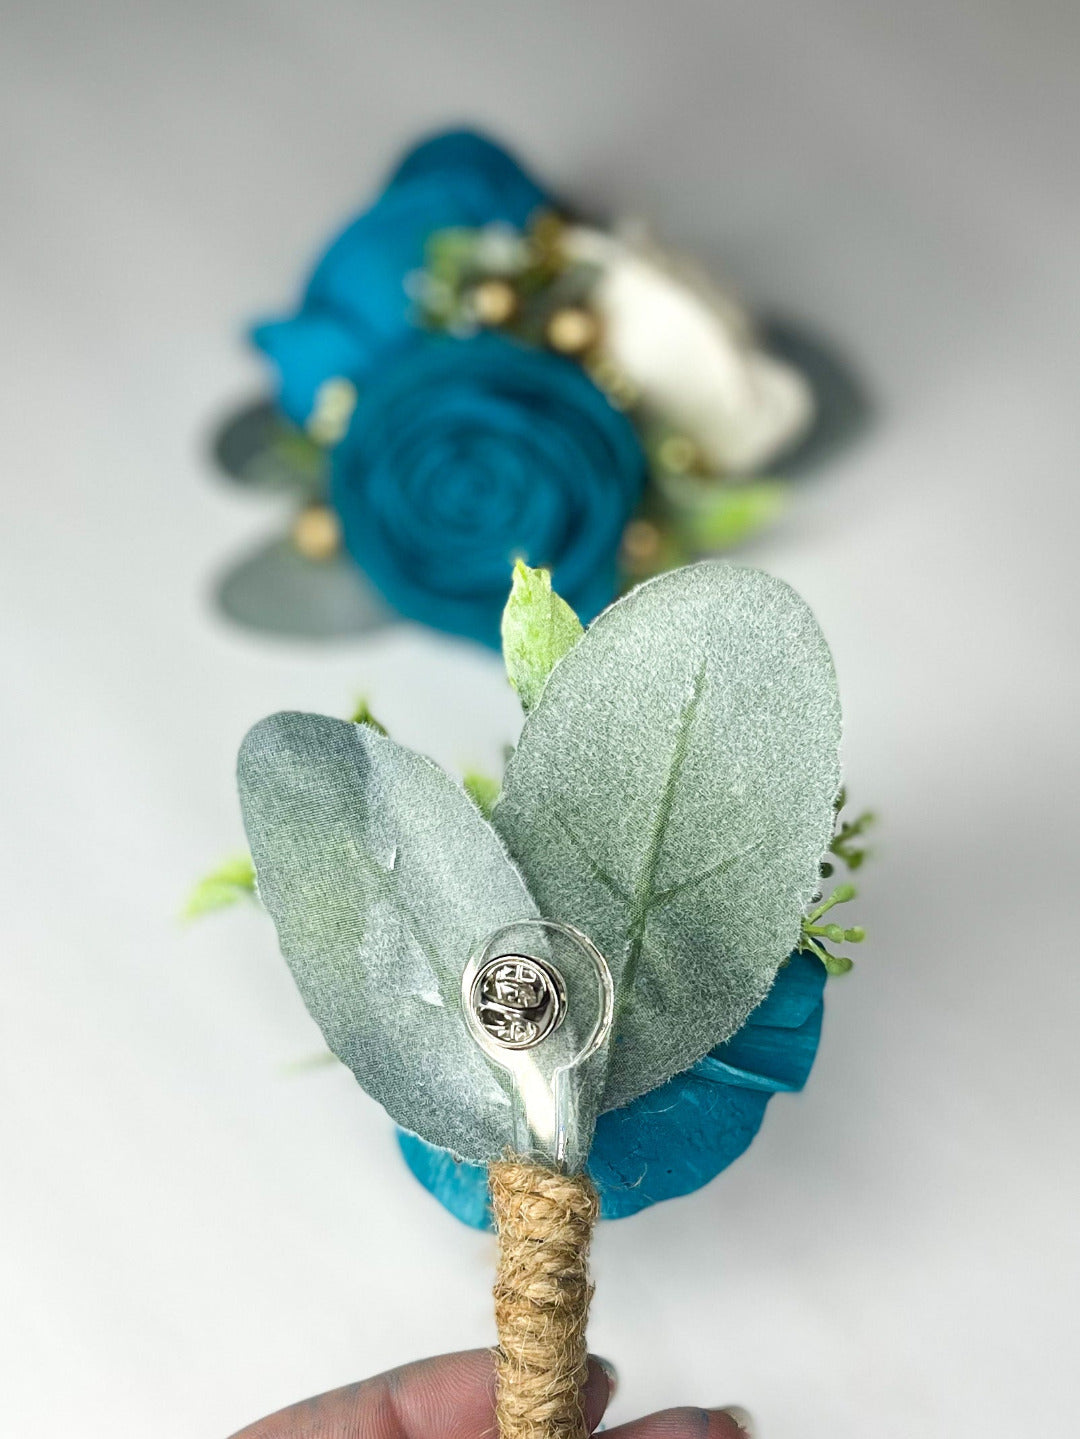 Custom Corsage and Boutonniere Orders